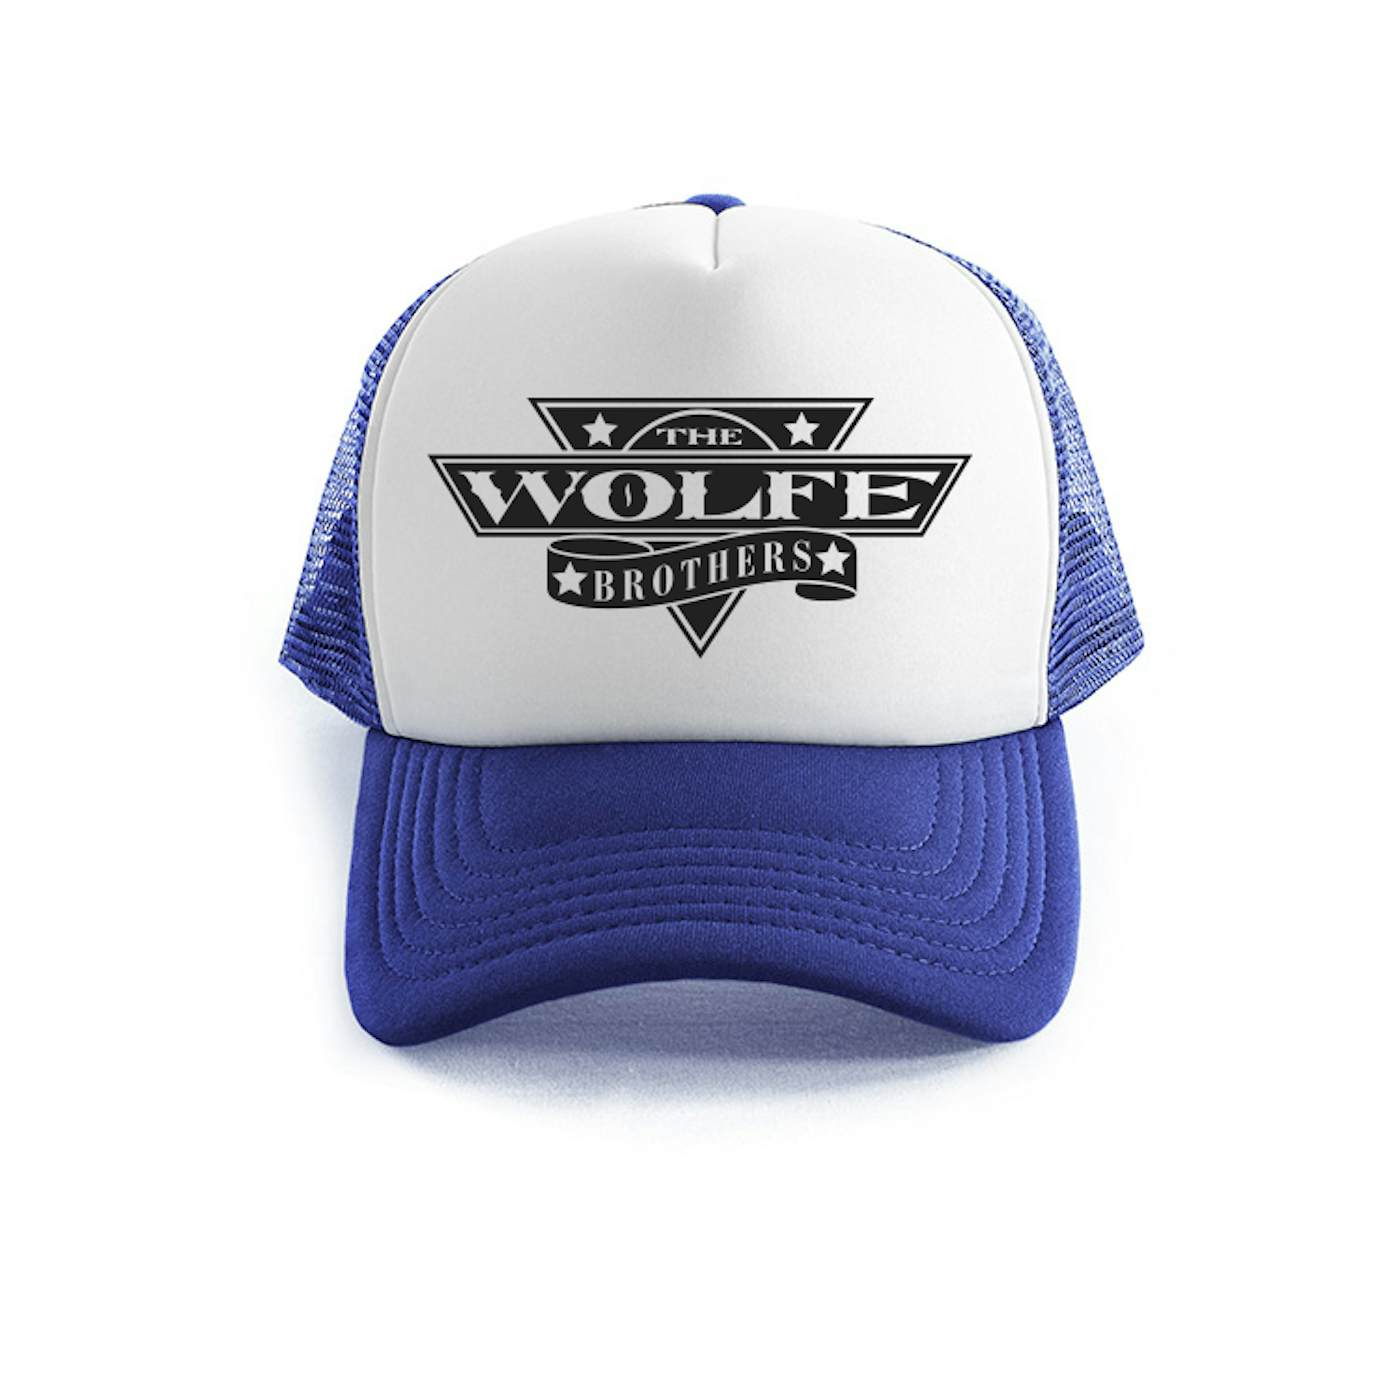 The Wolfe Brothers - Blue Trucker Cap